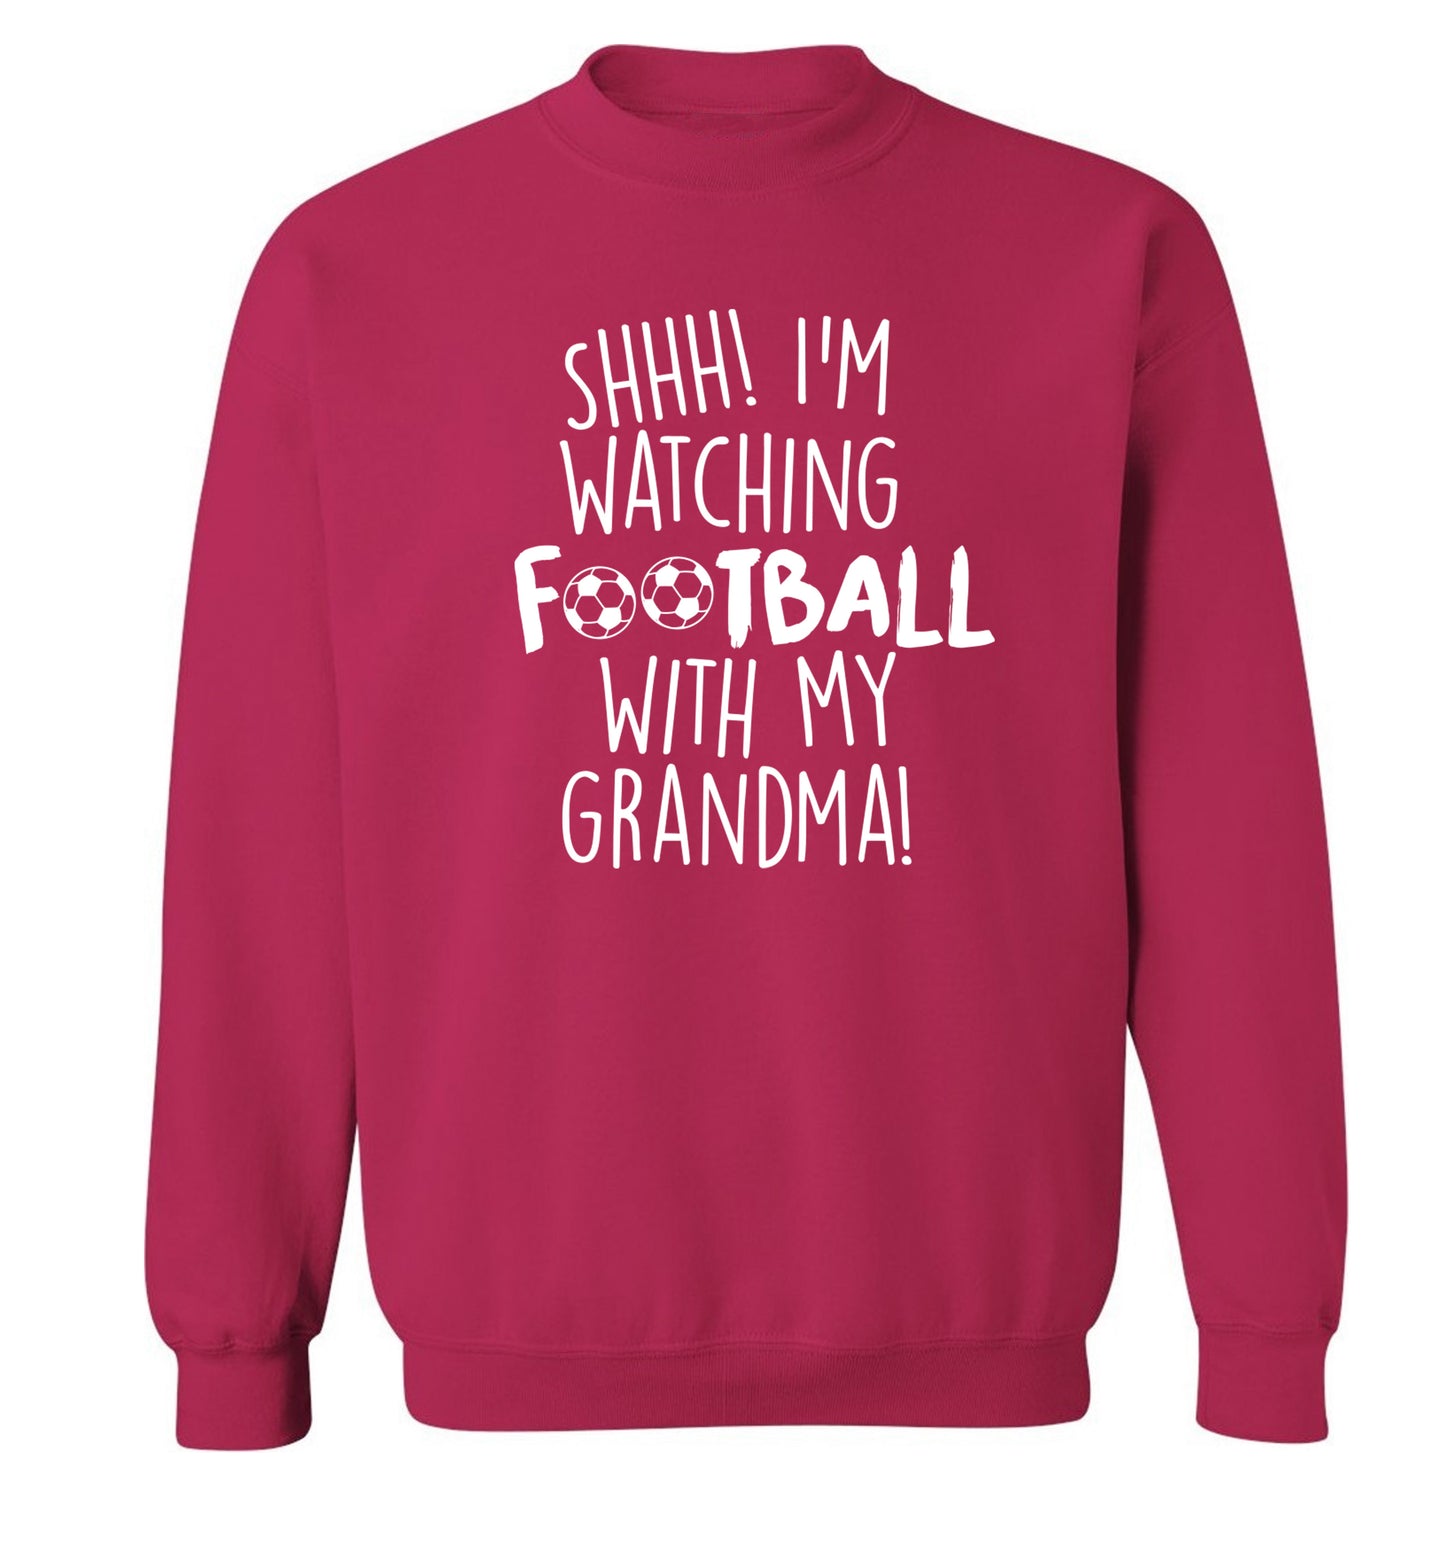 Shhh I'm watching football with my grandma Adult's unisexpink Sweater 2XL